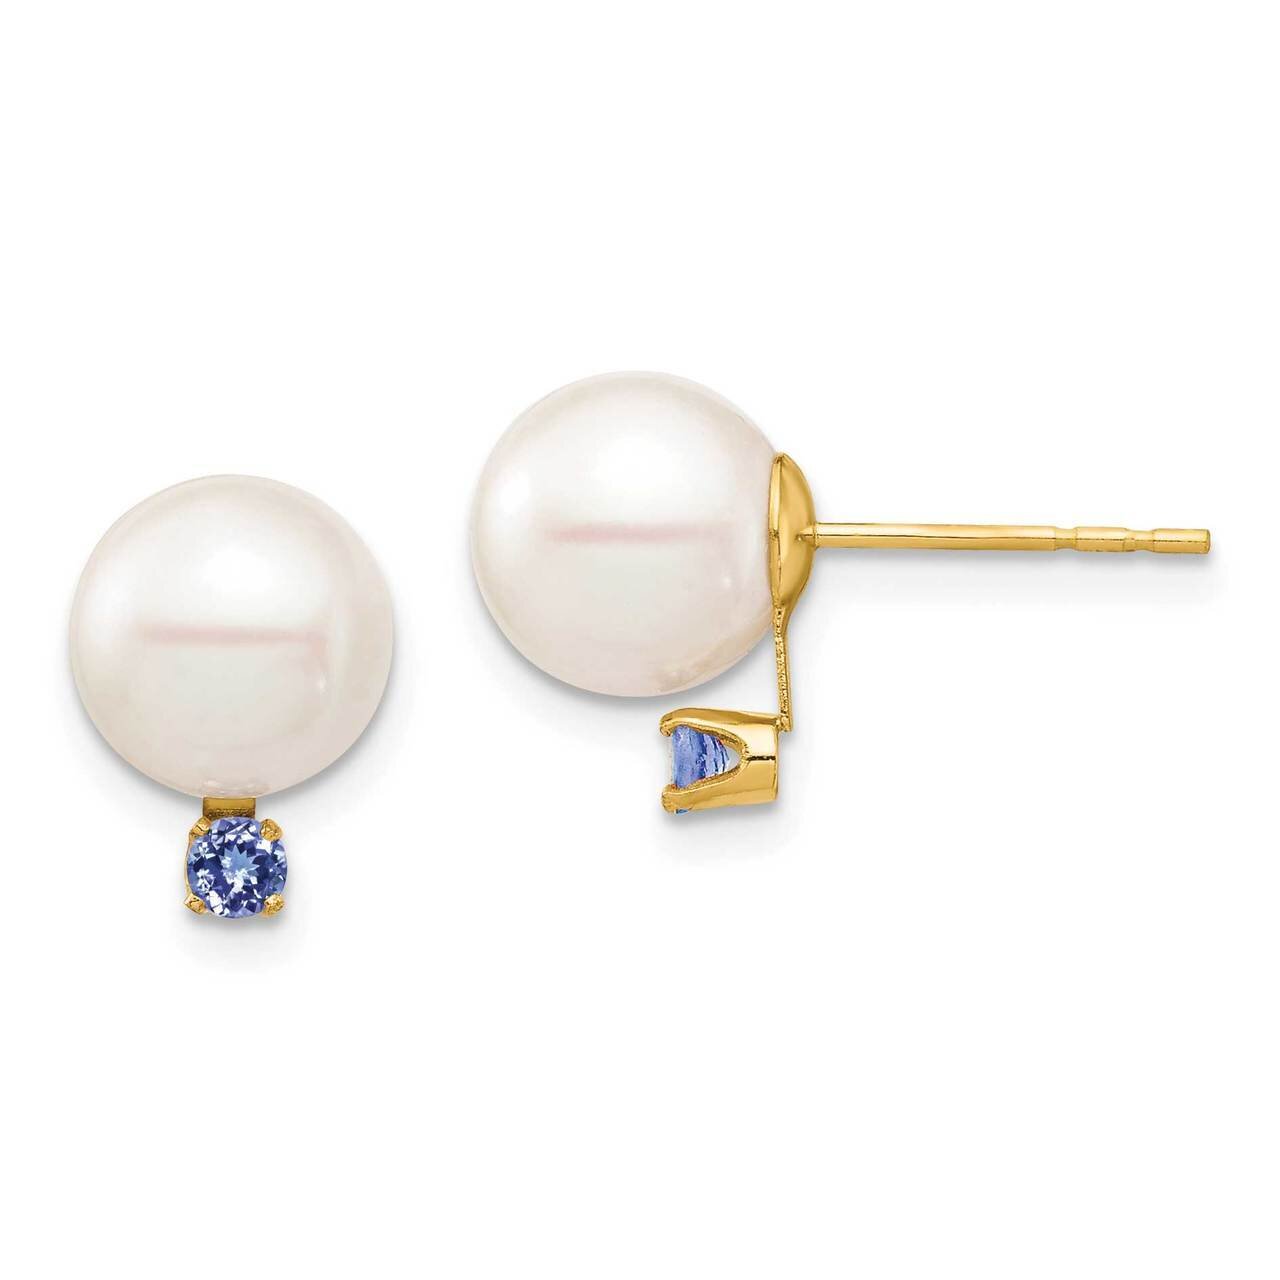 8-8.5mm White Round Freshwater Cultured Pearl Tanzanite Post Earrings 14k Gold XF754E_TZ